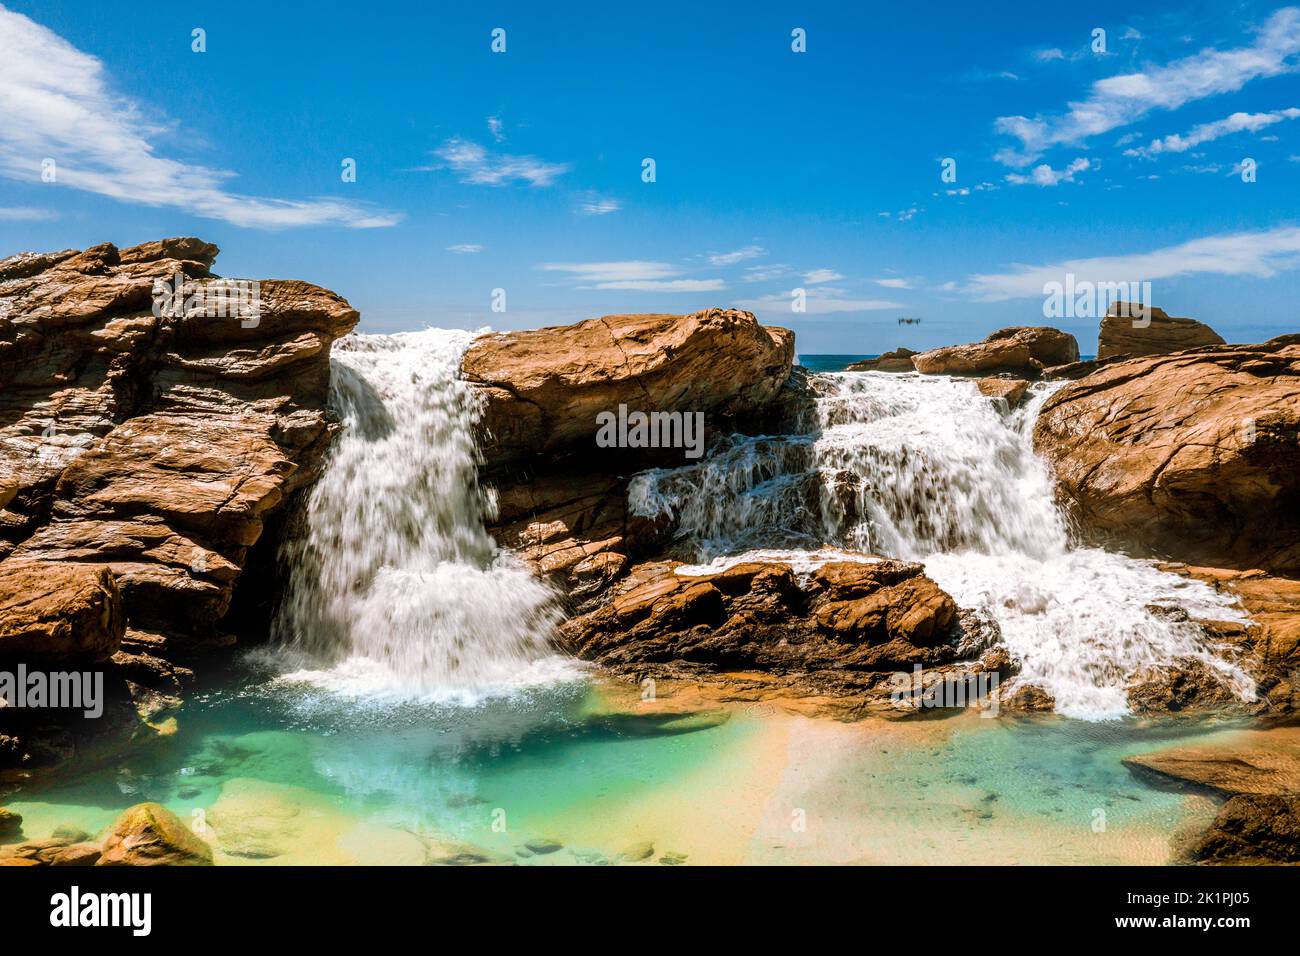 Water tumbles over rocks and into an ocean rockpool Stock Photo